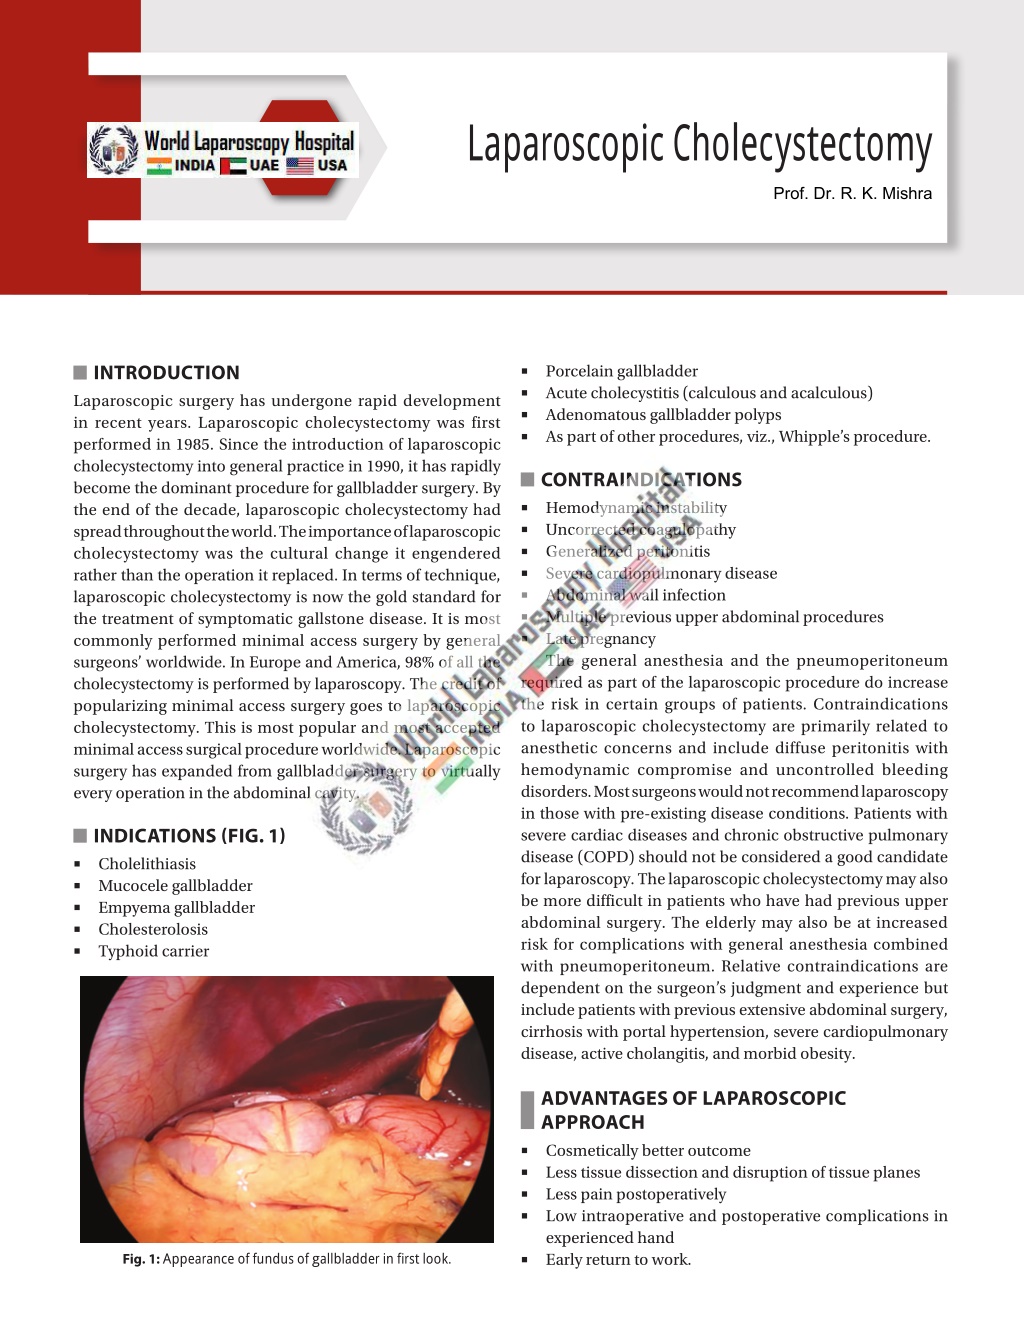 Safe laparoscopic subtotal cholecystectomy in the face of severe  inflammation in the cystohepatic triangle: a retrospective review and  proposed management strategy for the difficult gallbladder | CJS